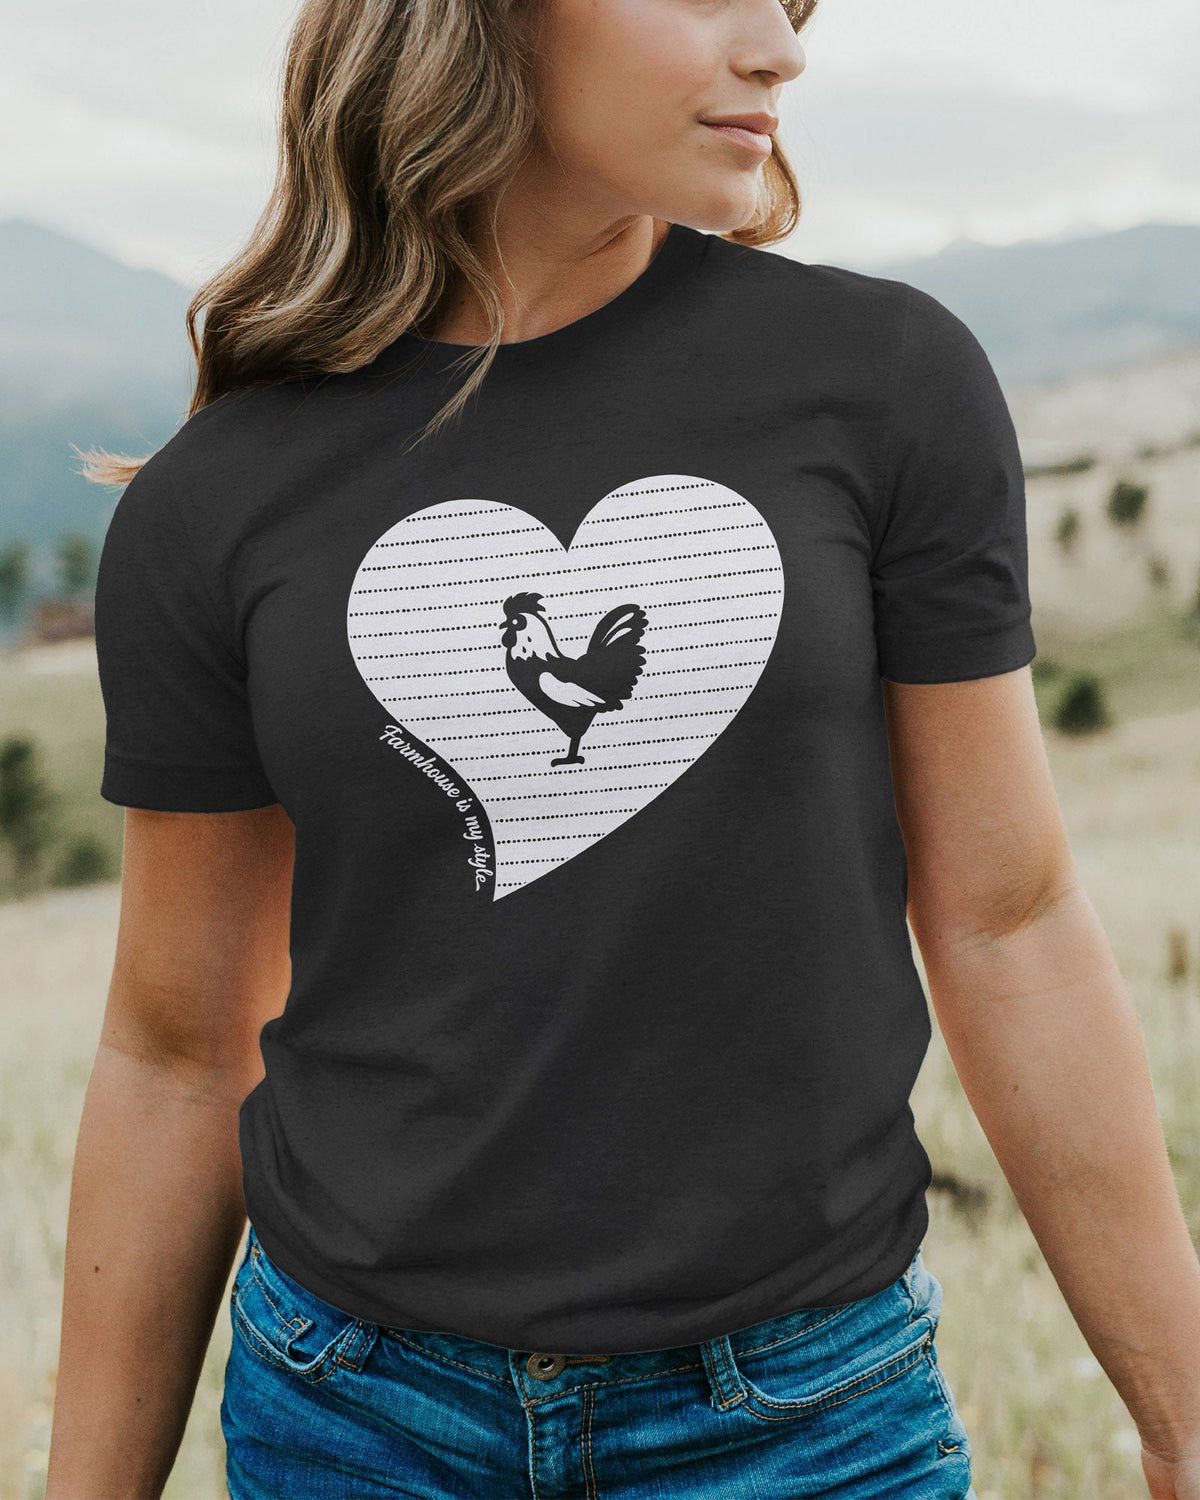 Shiplap Rooster T-Shirt Tee - Farmhouse Is My Style